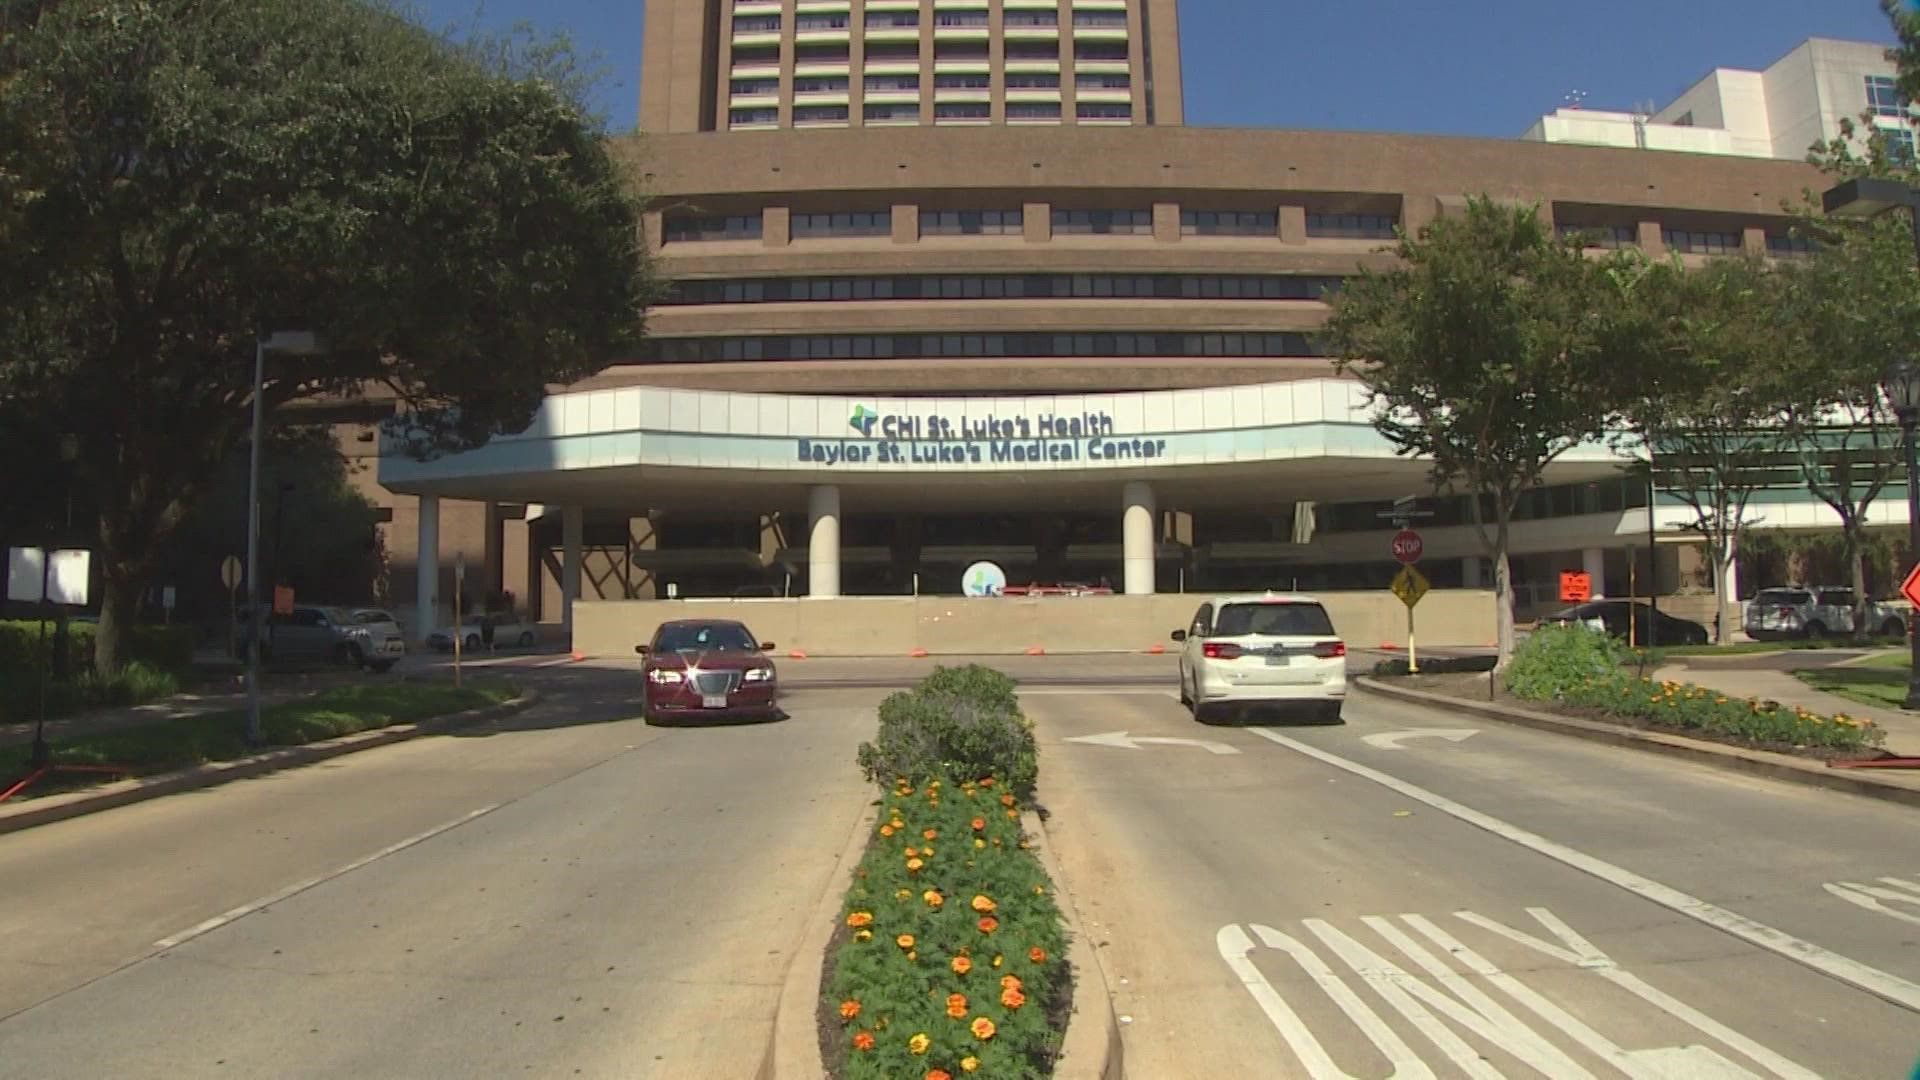 St. Luke's Health, a health care system in Texas, was hit by an IT security incident. Patient appointments are being rescheduled and IT systems were taken offline.